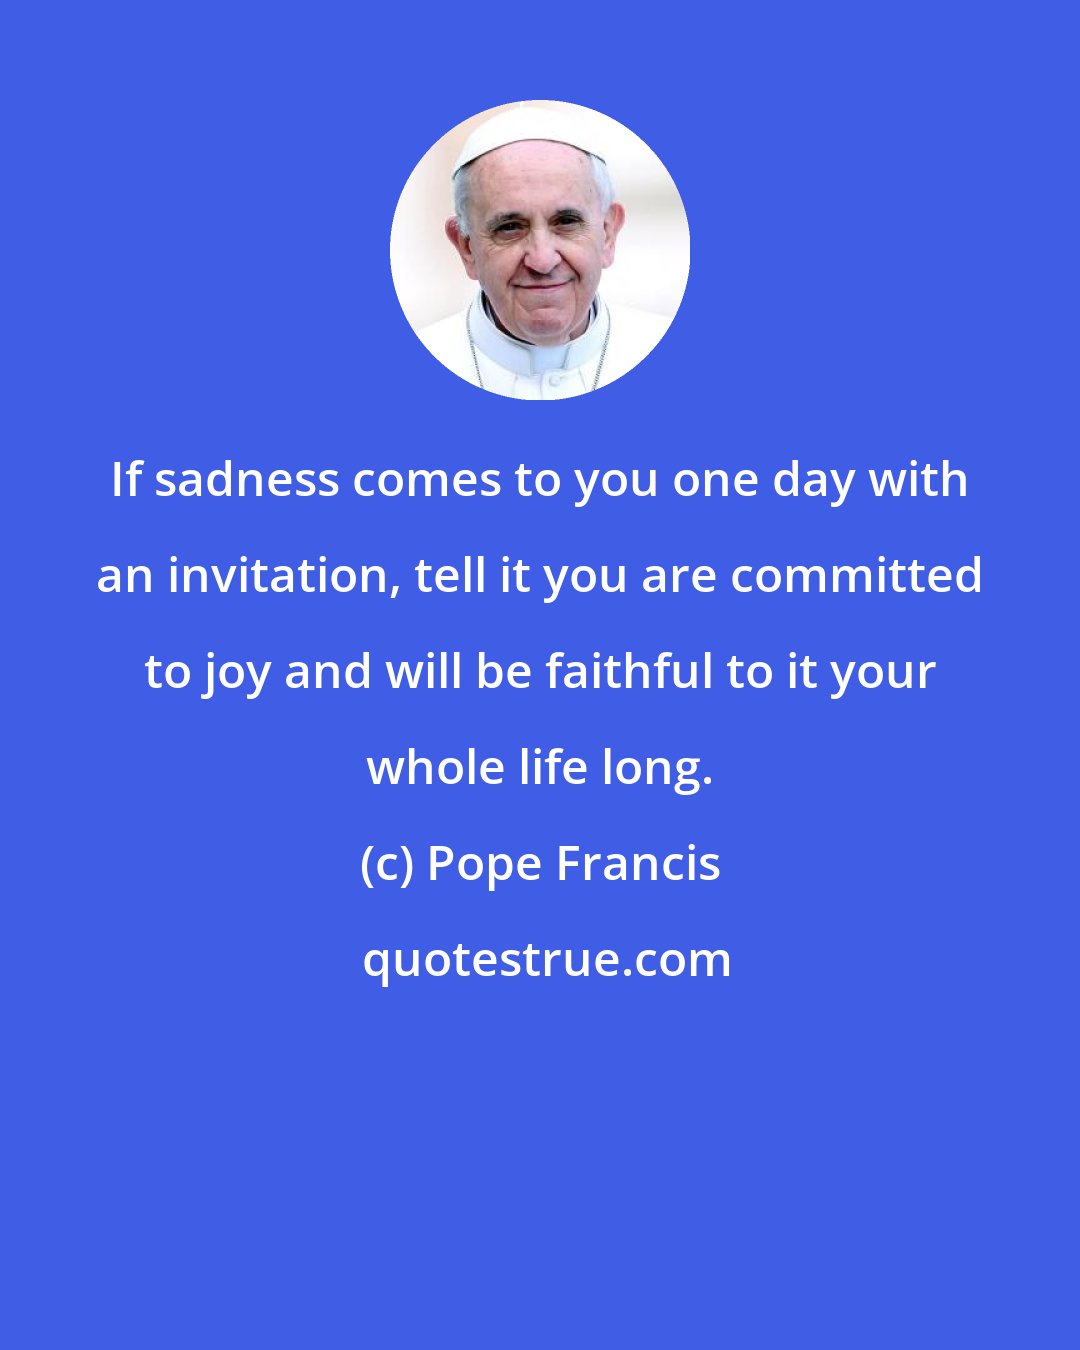 Pope Francis: If sadness comes to you one day with an invitation, tell it you are committed to joy and will be faithful to it your whole life long.